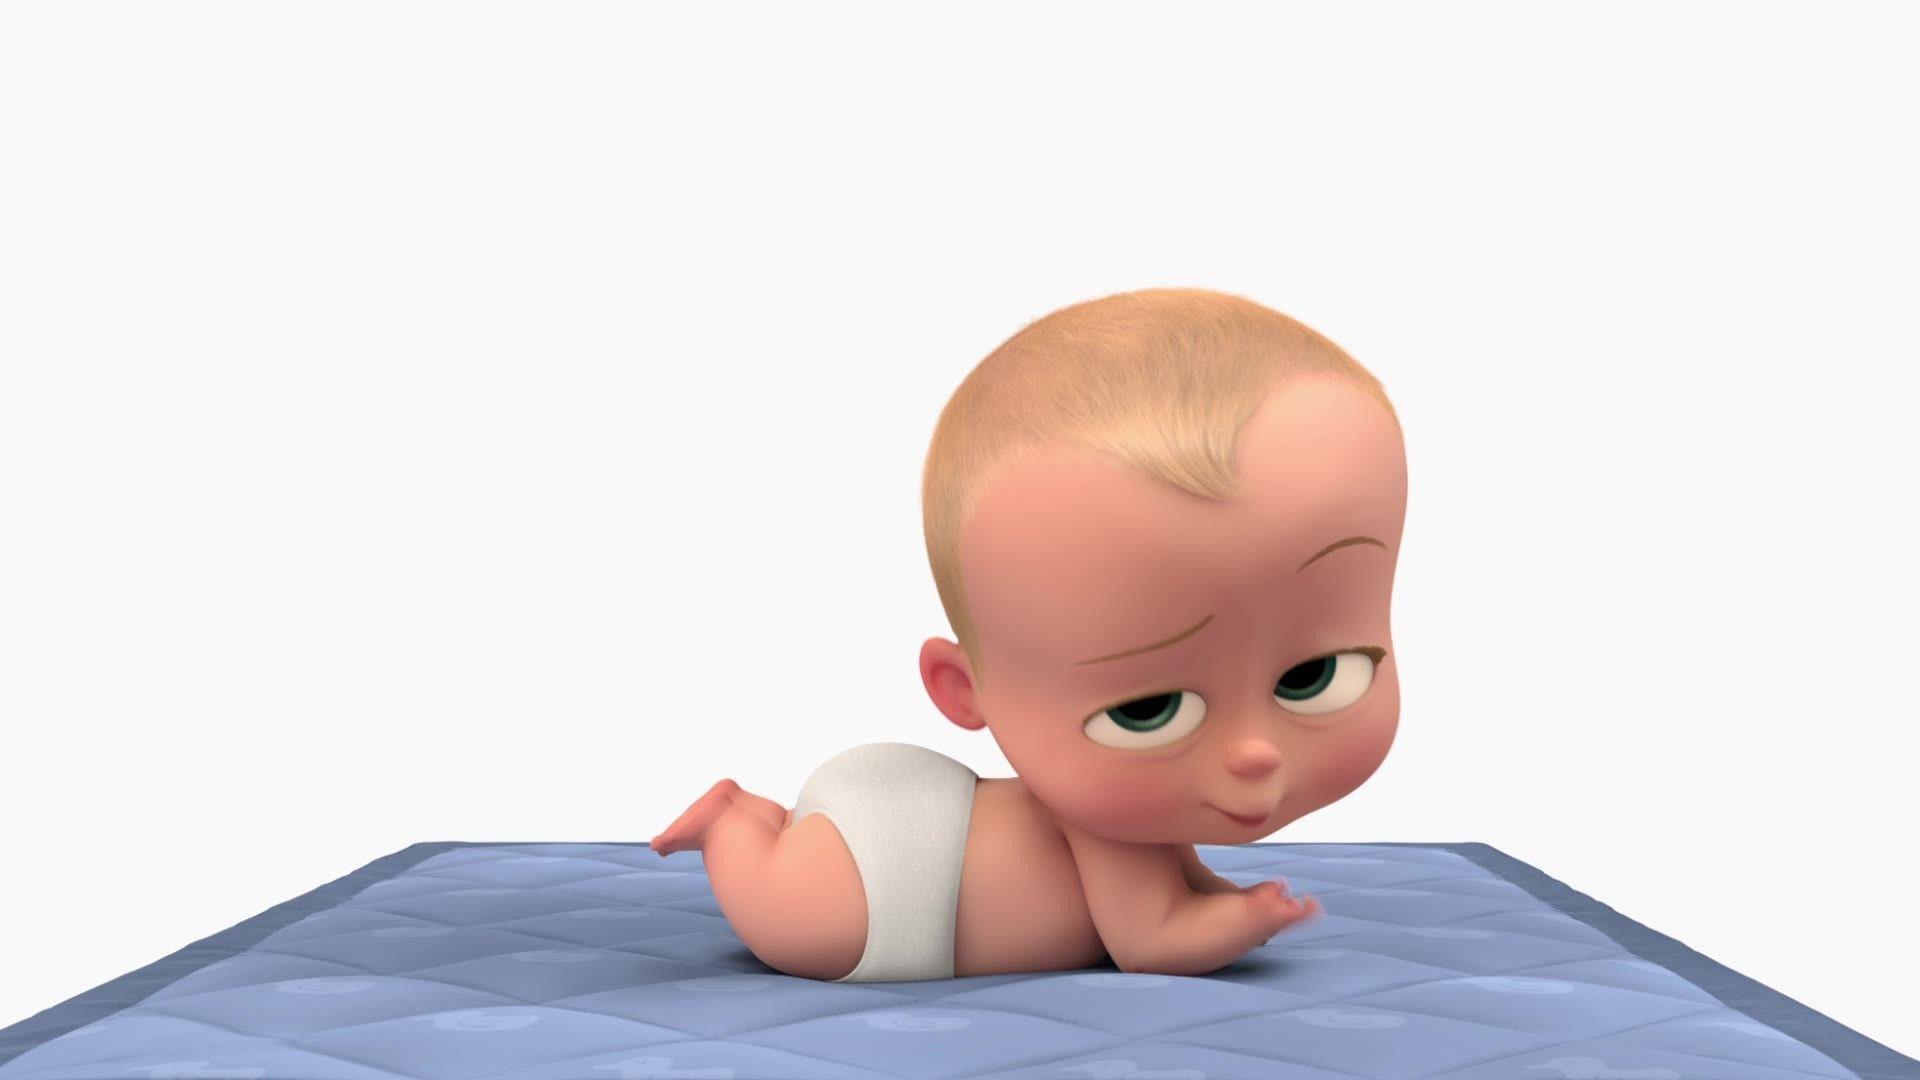 Watch The Boss Baby 2017 Full Movie Online Free. Watch The Boss